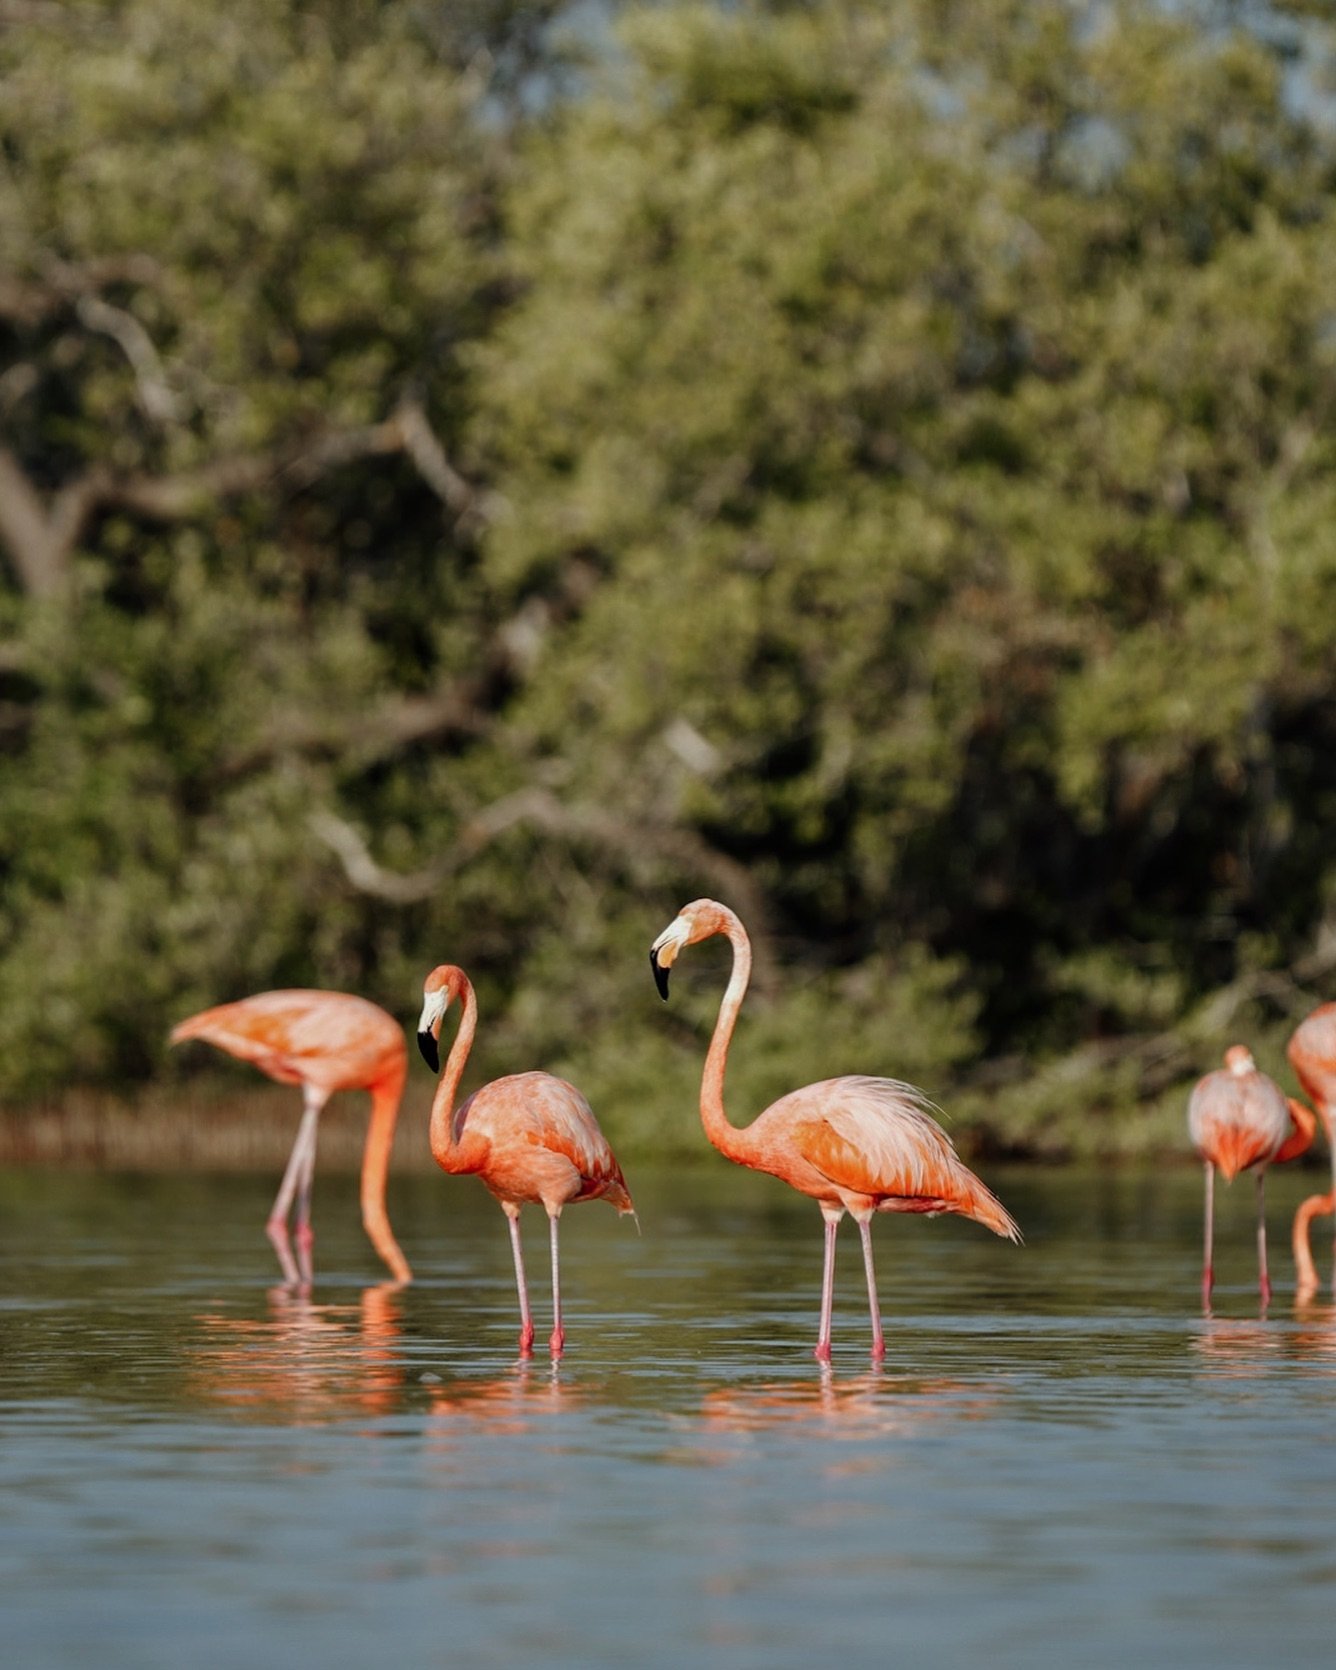 The beloved flamingos 🦩 have returned to our beaches, once again coming closer to delight us with their beauty. 
If you plan to visit them, it&rsquo;s IMPORTANT to respect their space and habitat. Maintain a suitable distance and refrain from bringi